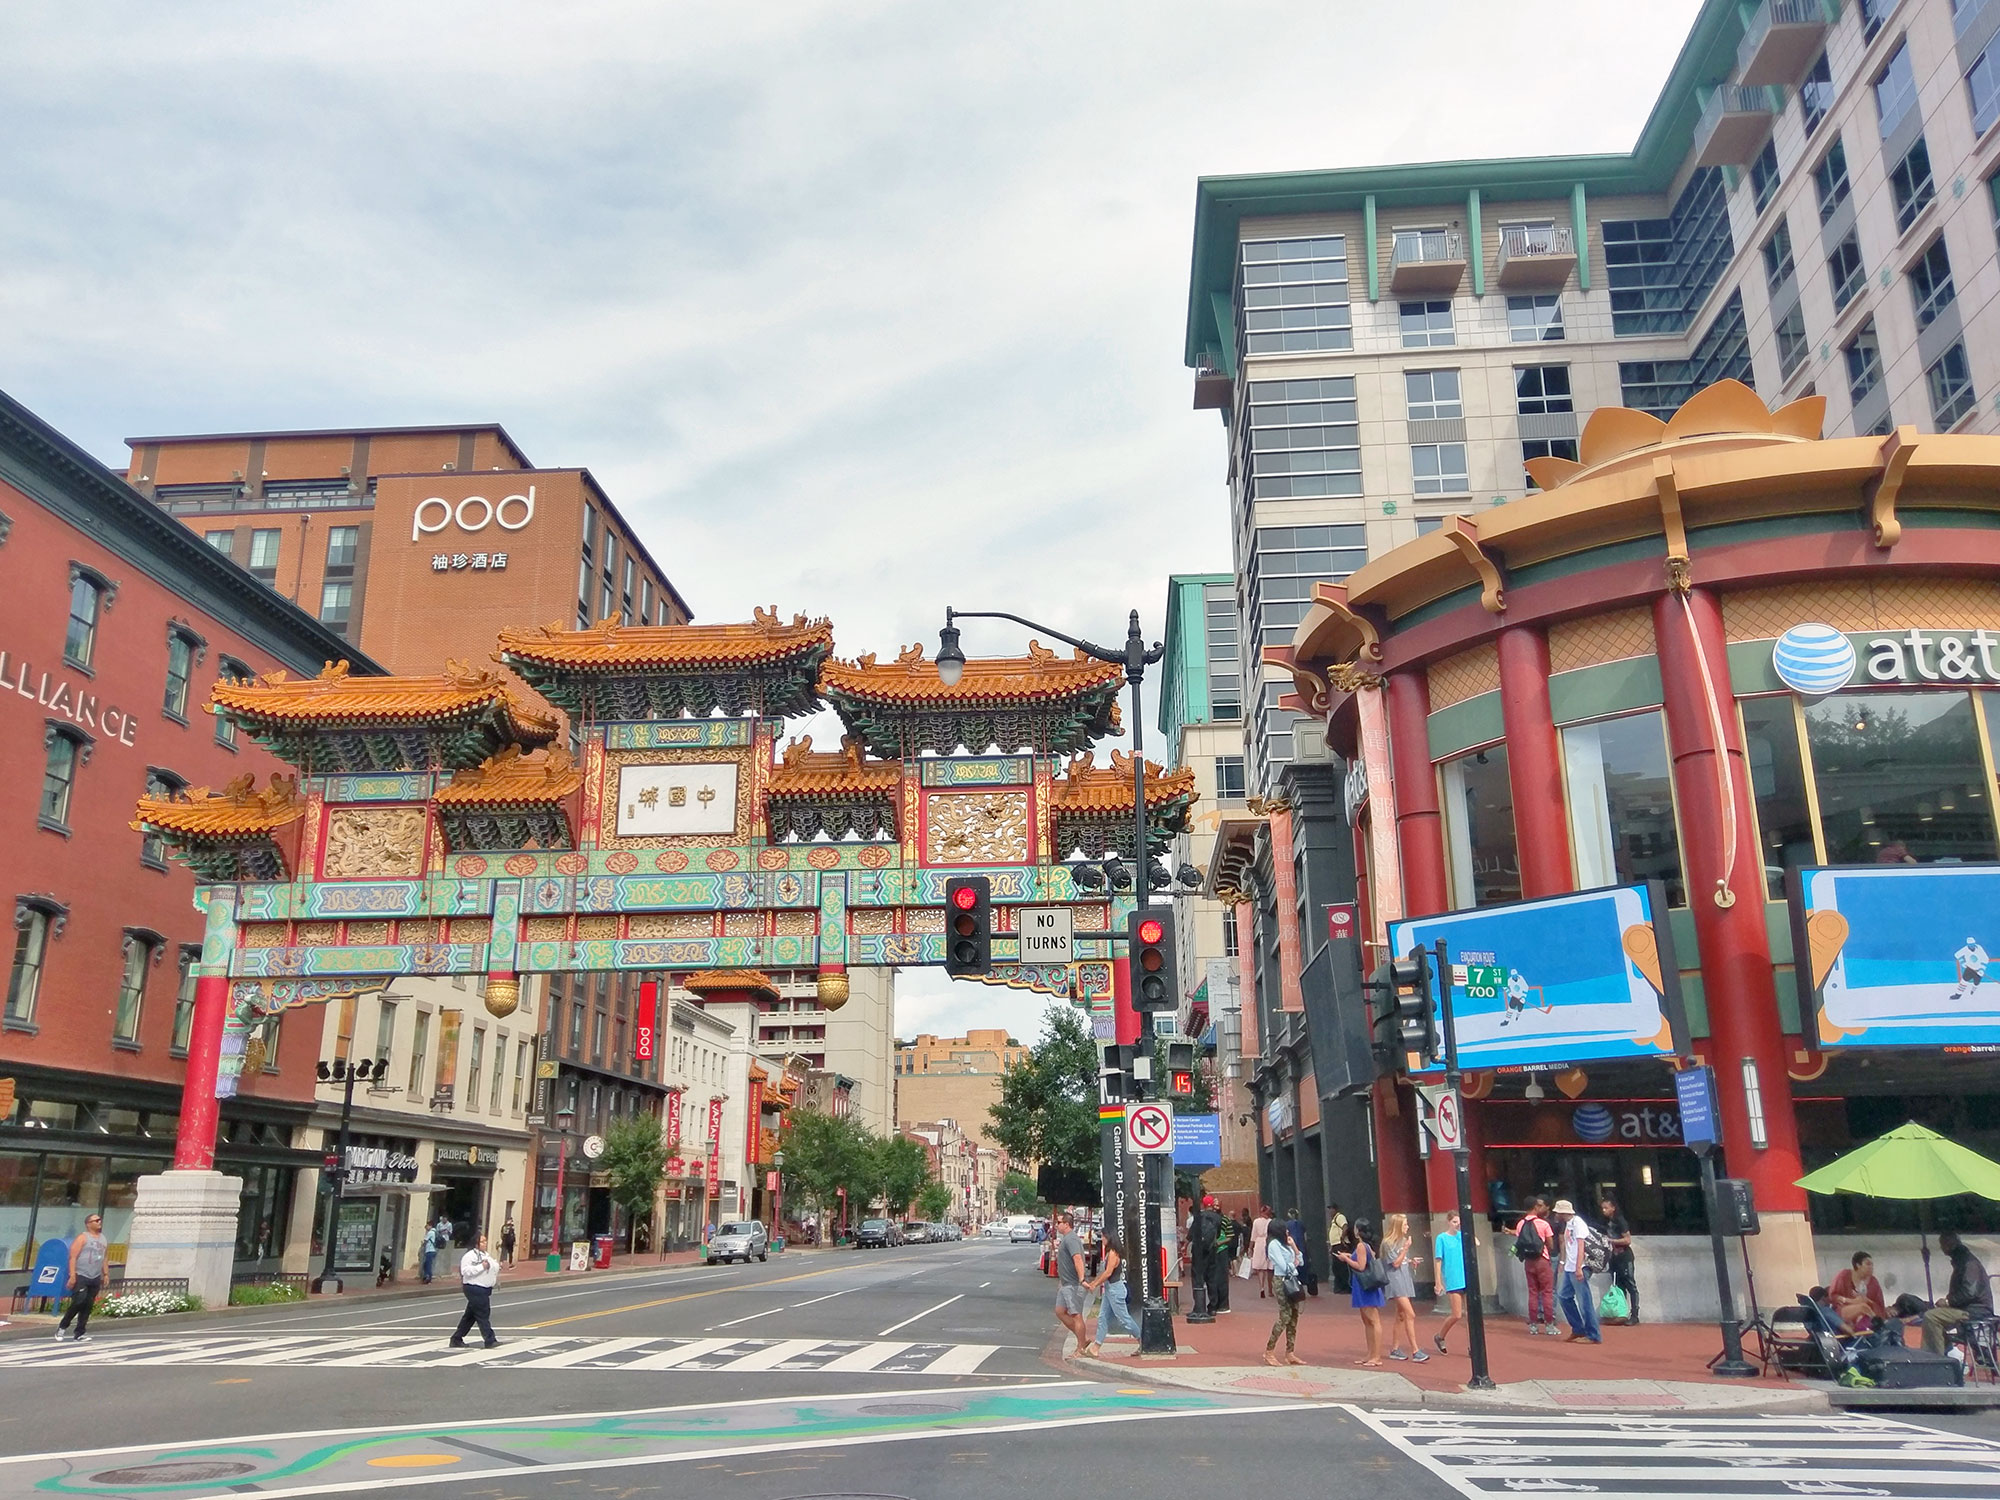 The archway and train station in Chinatown, D.C.